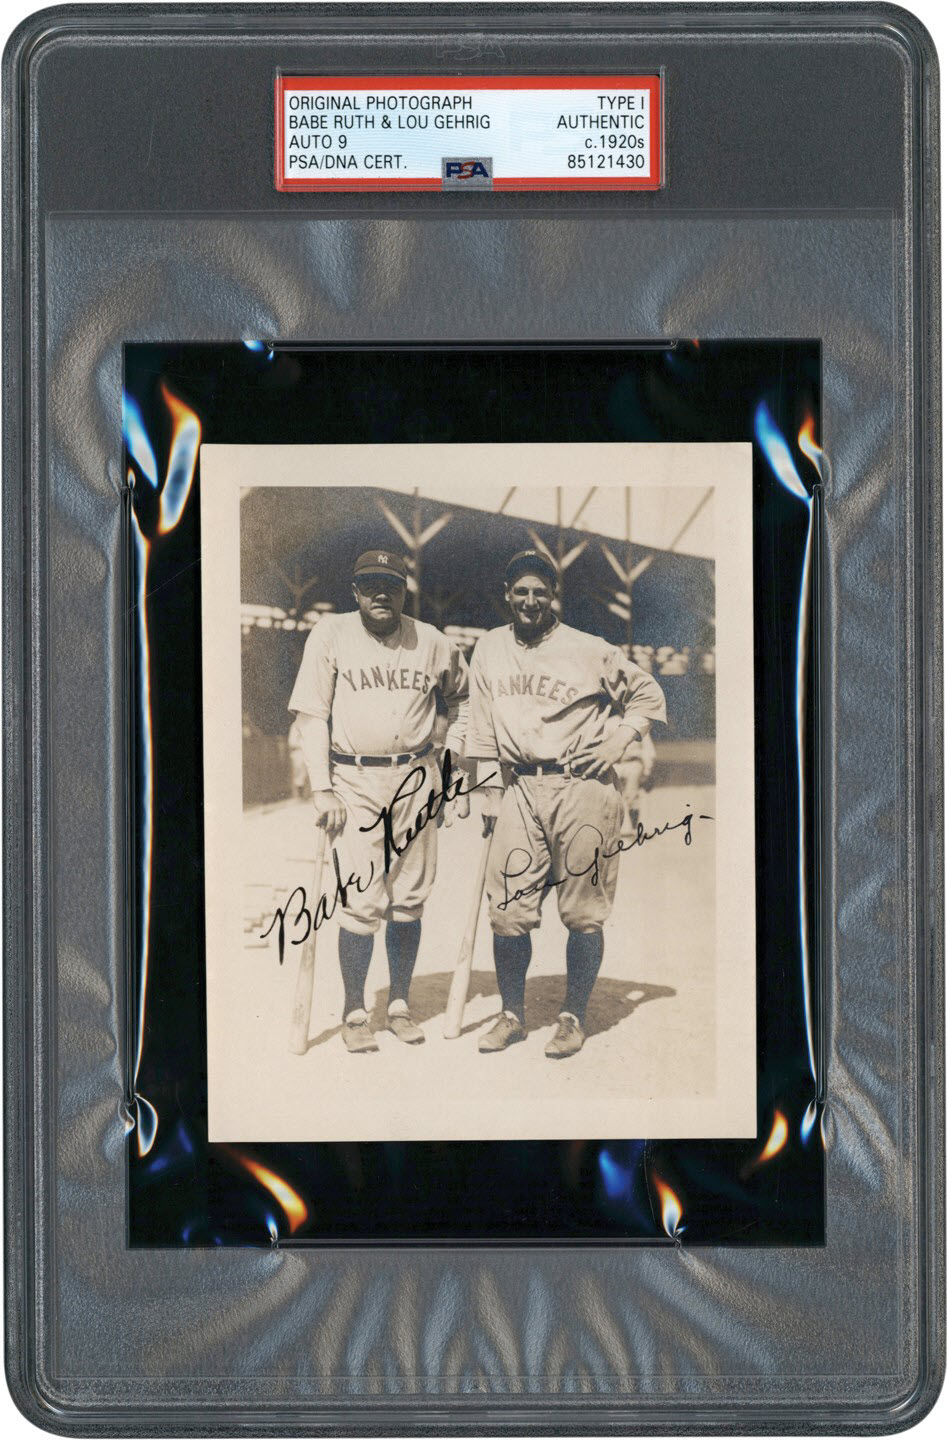 Babe-Ruth-Lou-Gehrig-1930s-Yankees-signed-photo-1.jpg